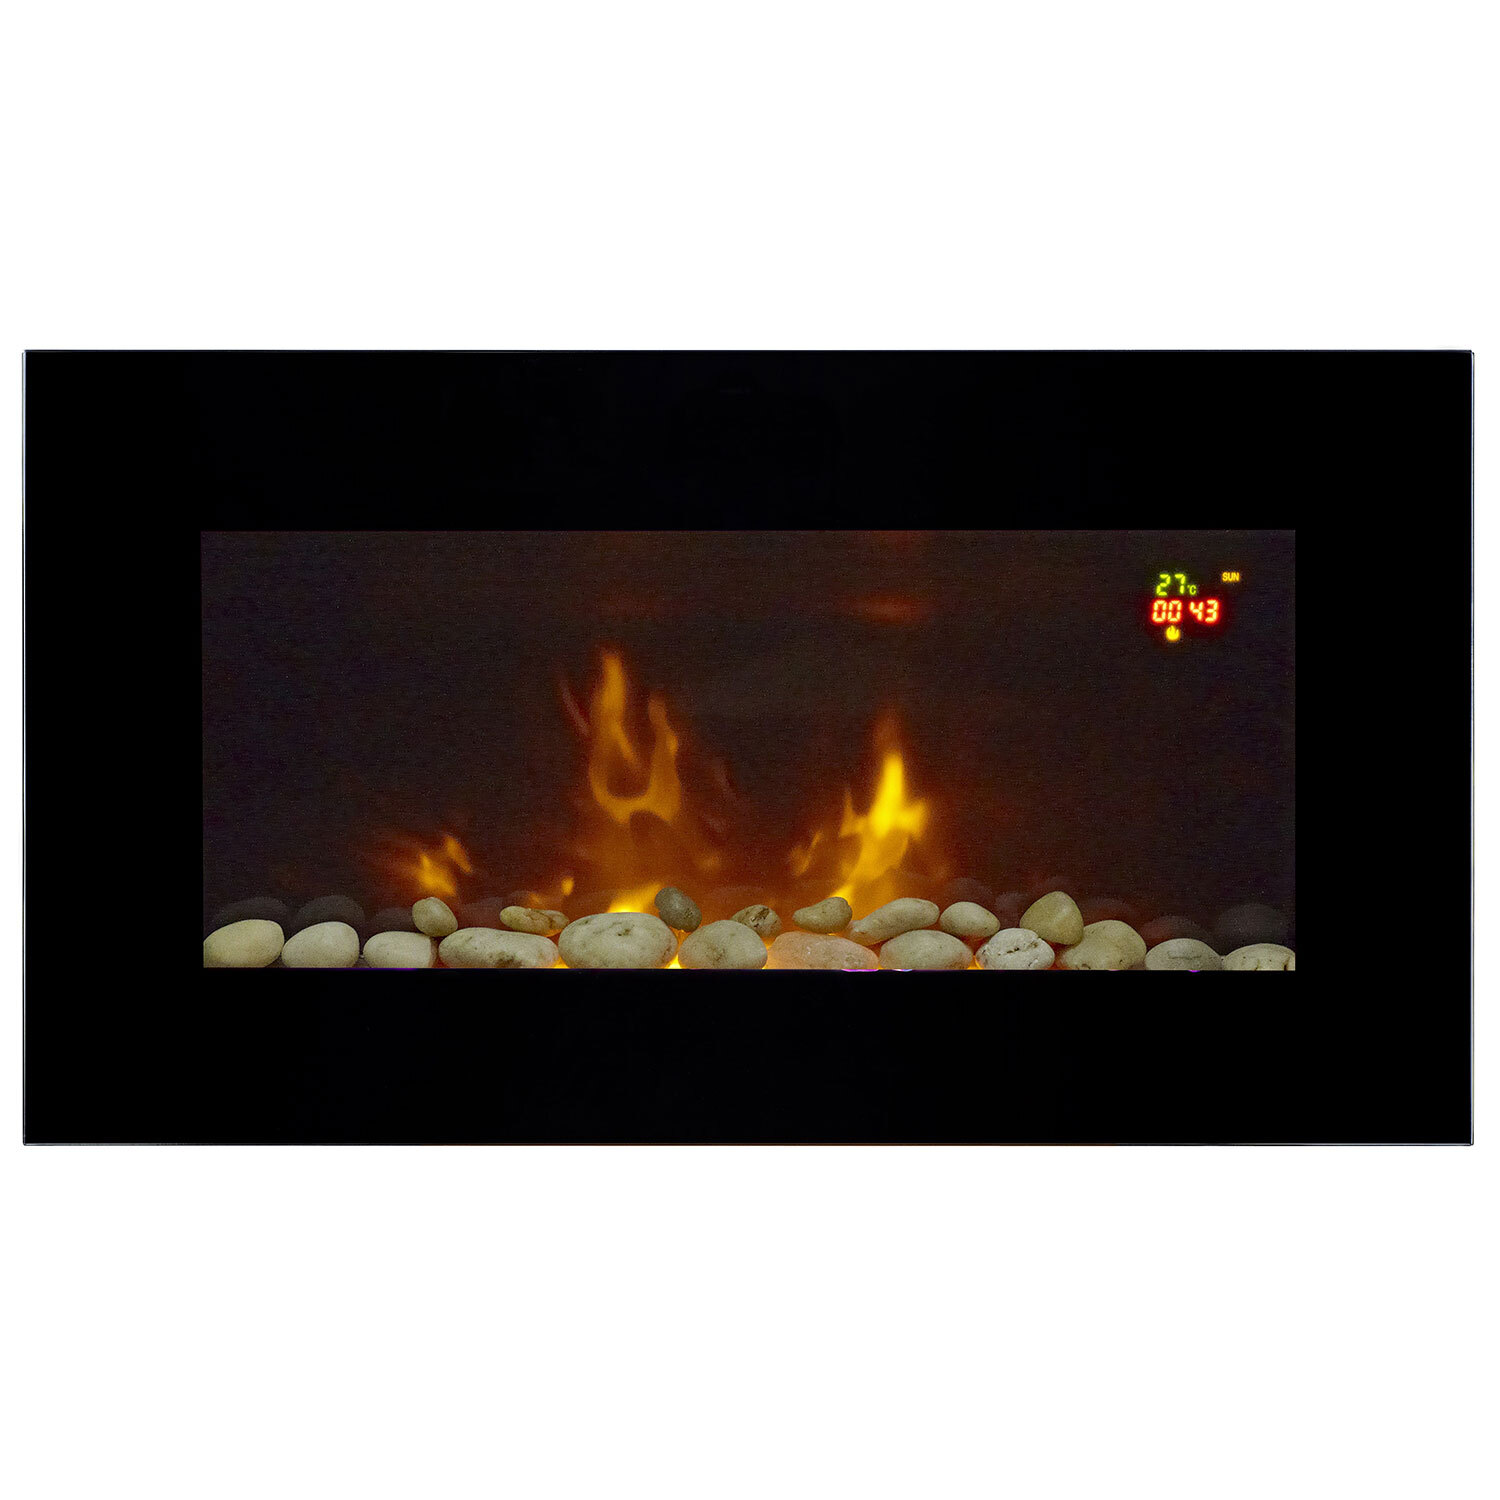 MyHome Black Aspen Wall Mounted Electric Firesuite Image 4